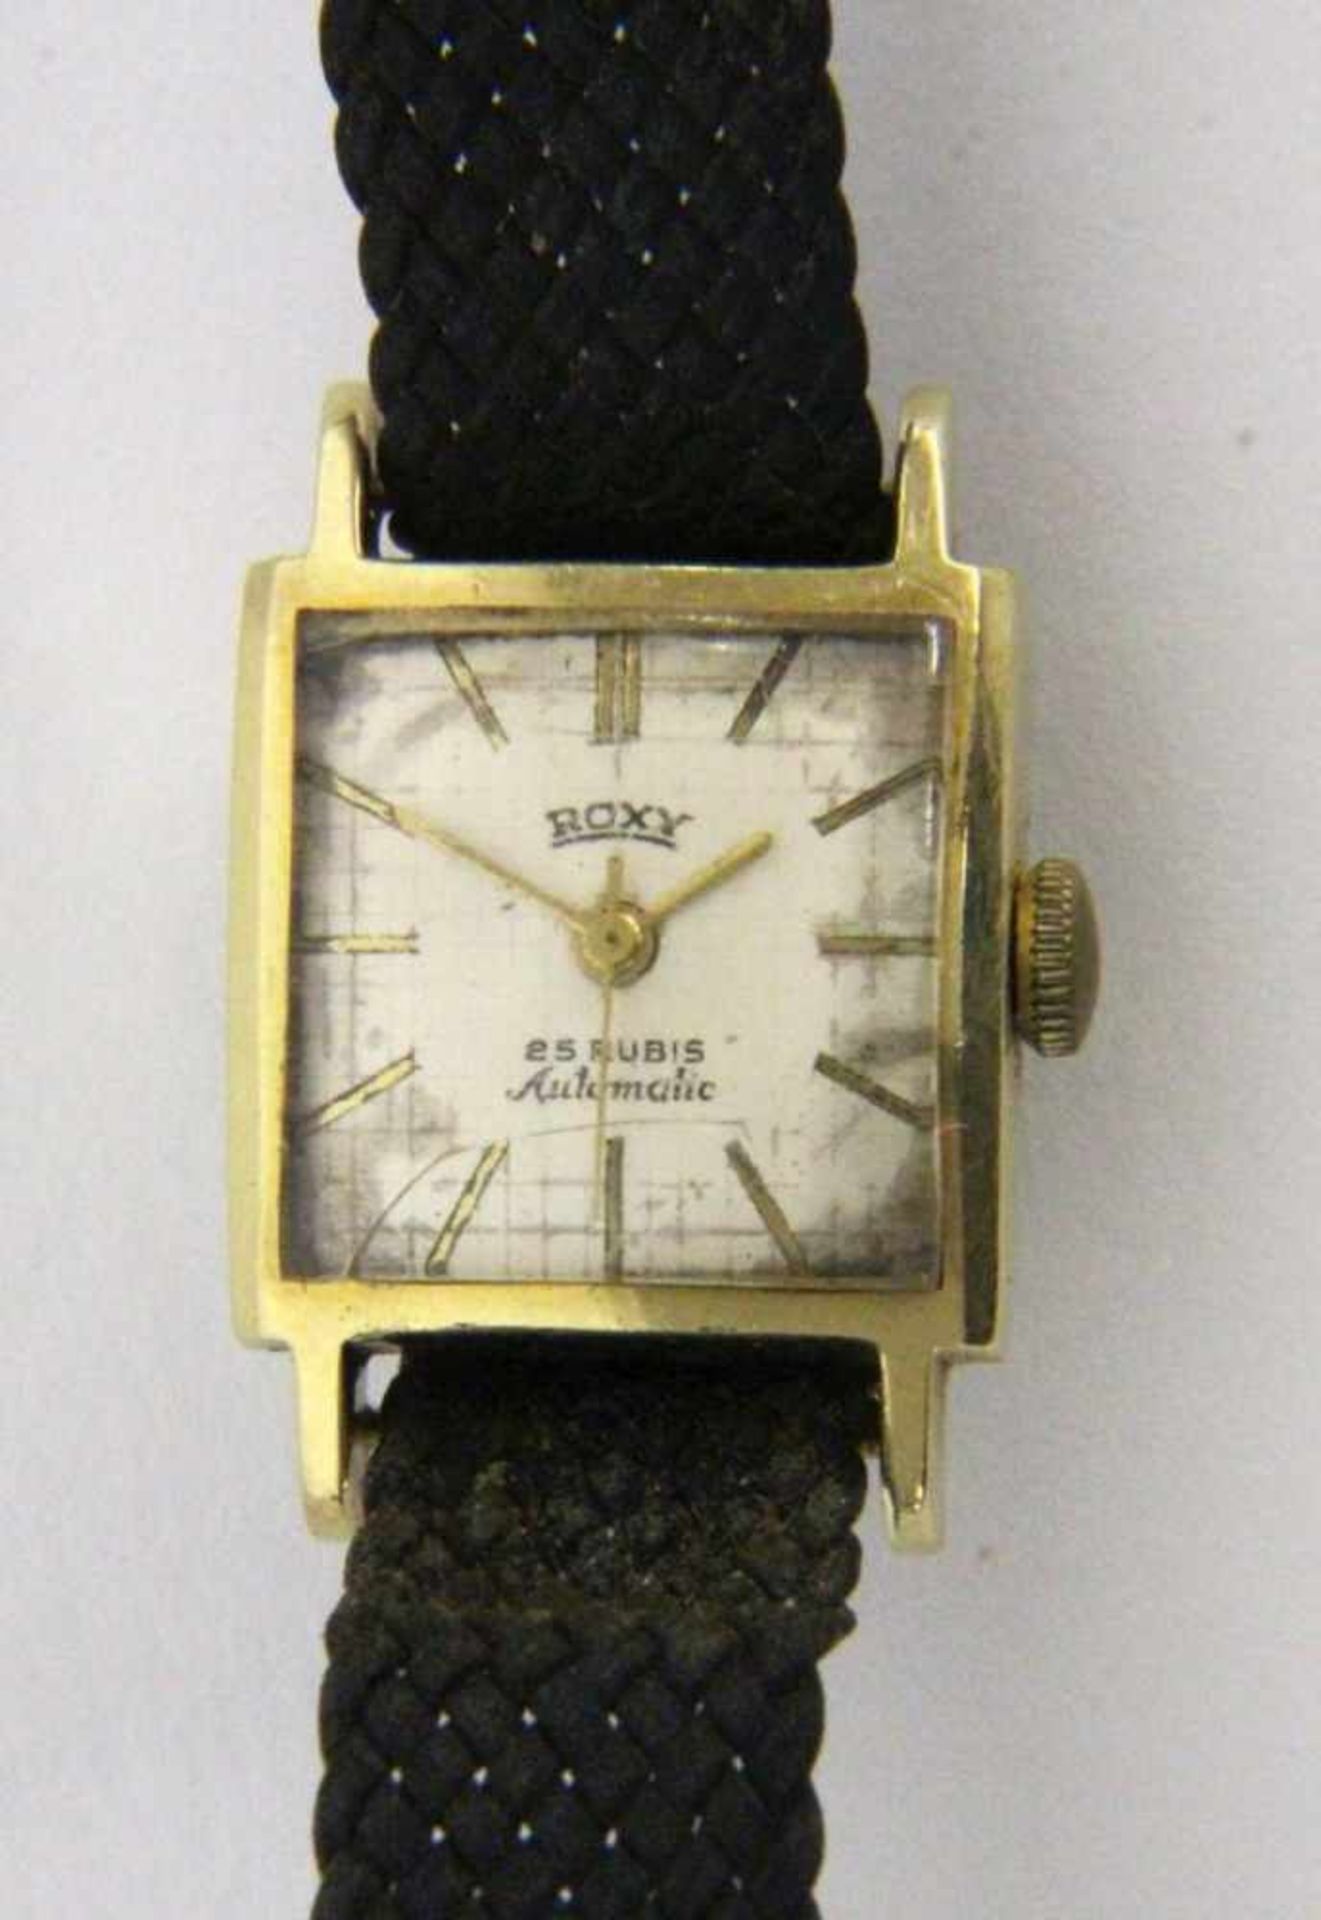 A ROXY LADIES WRISTWATCH 1950s/1960s Case 585/000 yellow gold. Mechanical movement withmanual